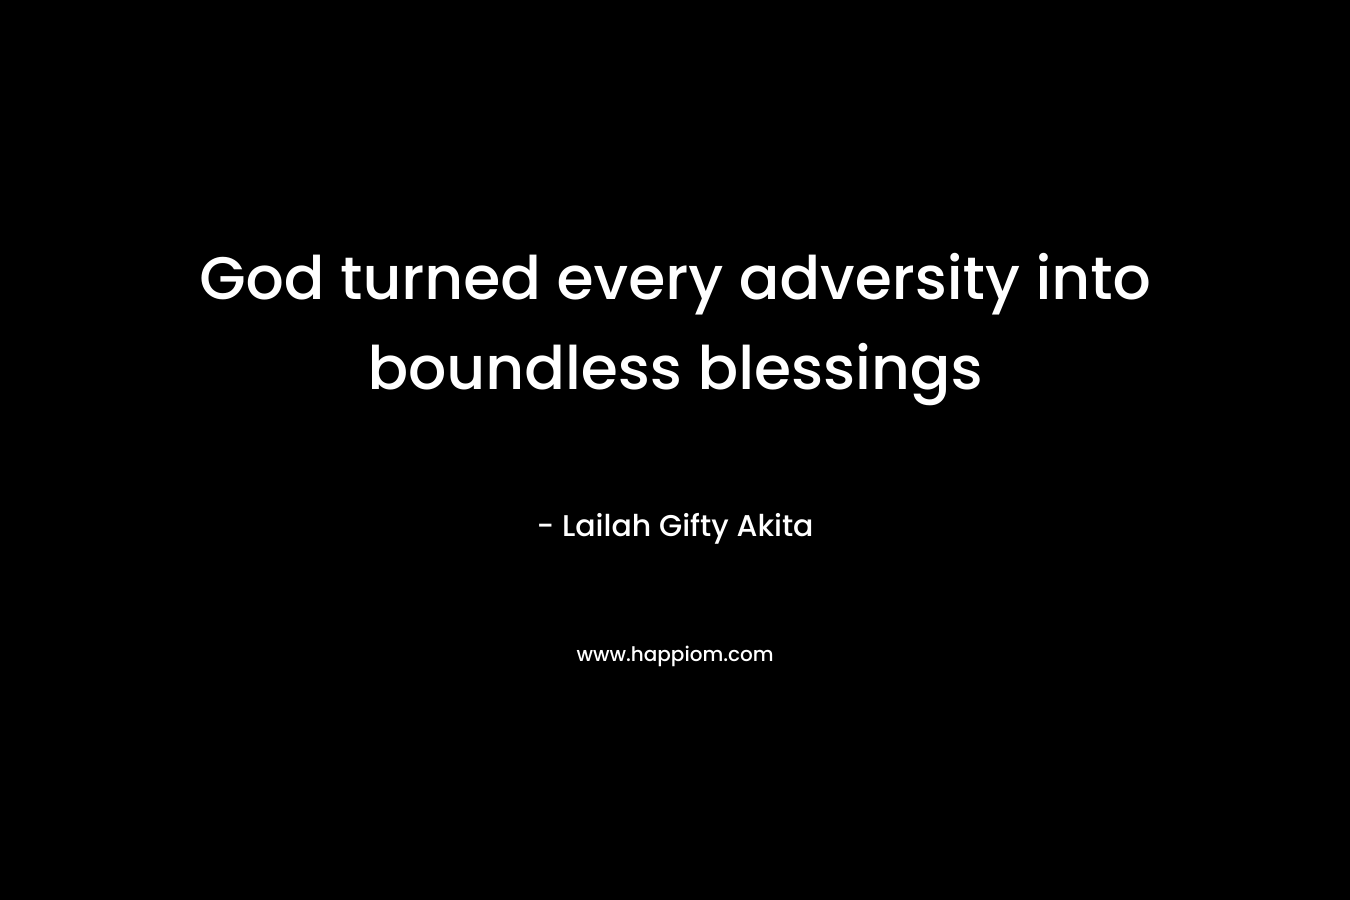 God turned every adversity into boundless blessings